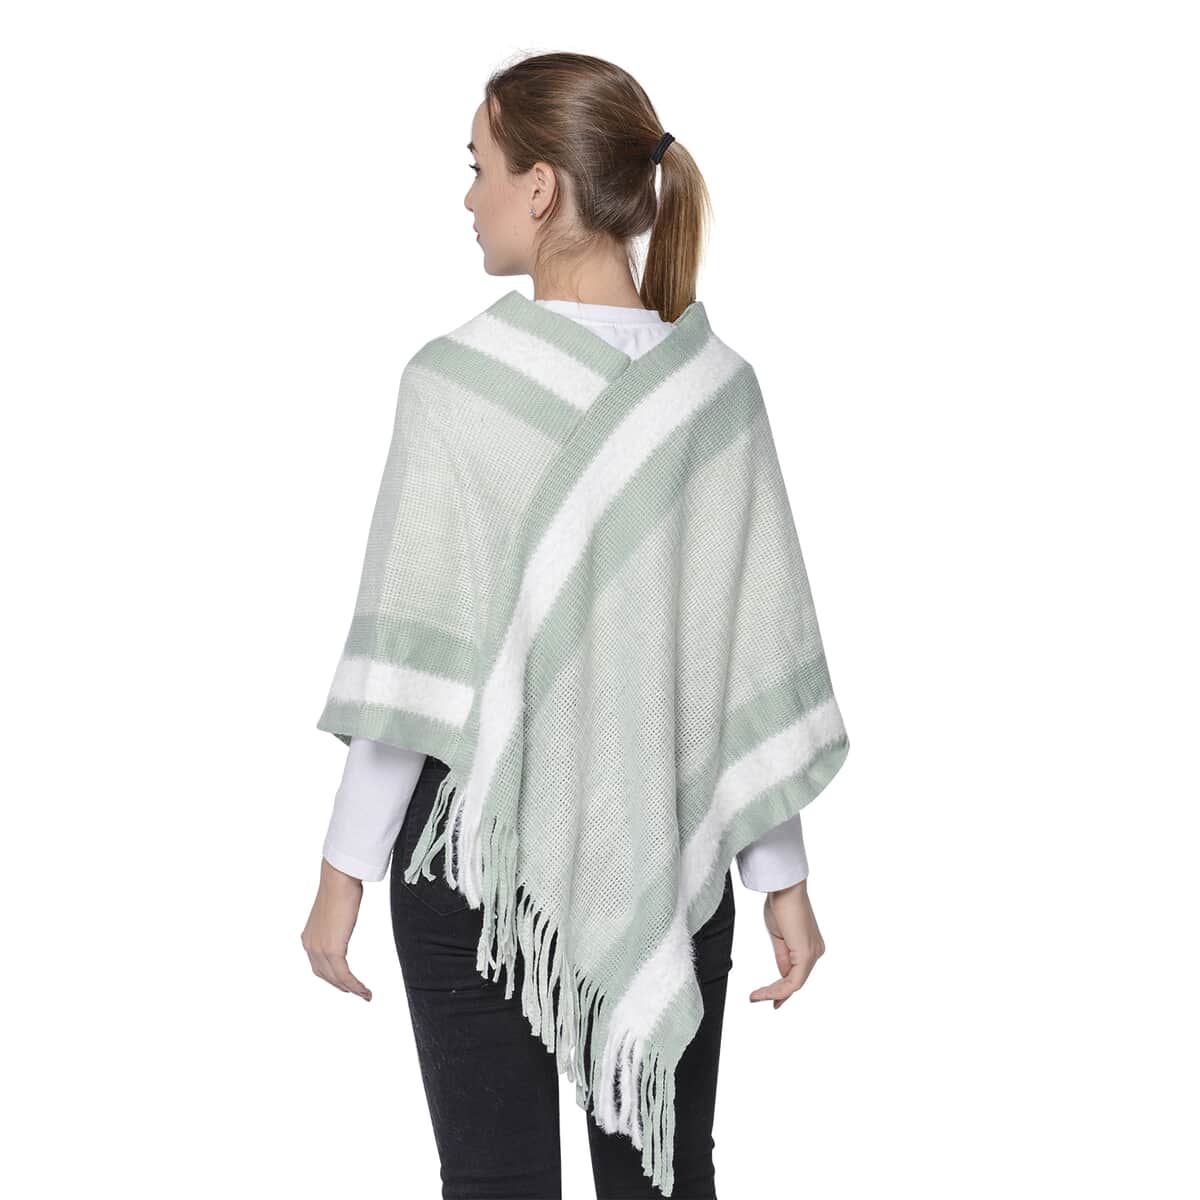 Seafoam Green Striped Border Poncho with Fringe (70% Acrylic and 30% Polyester) image number 1